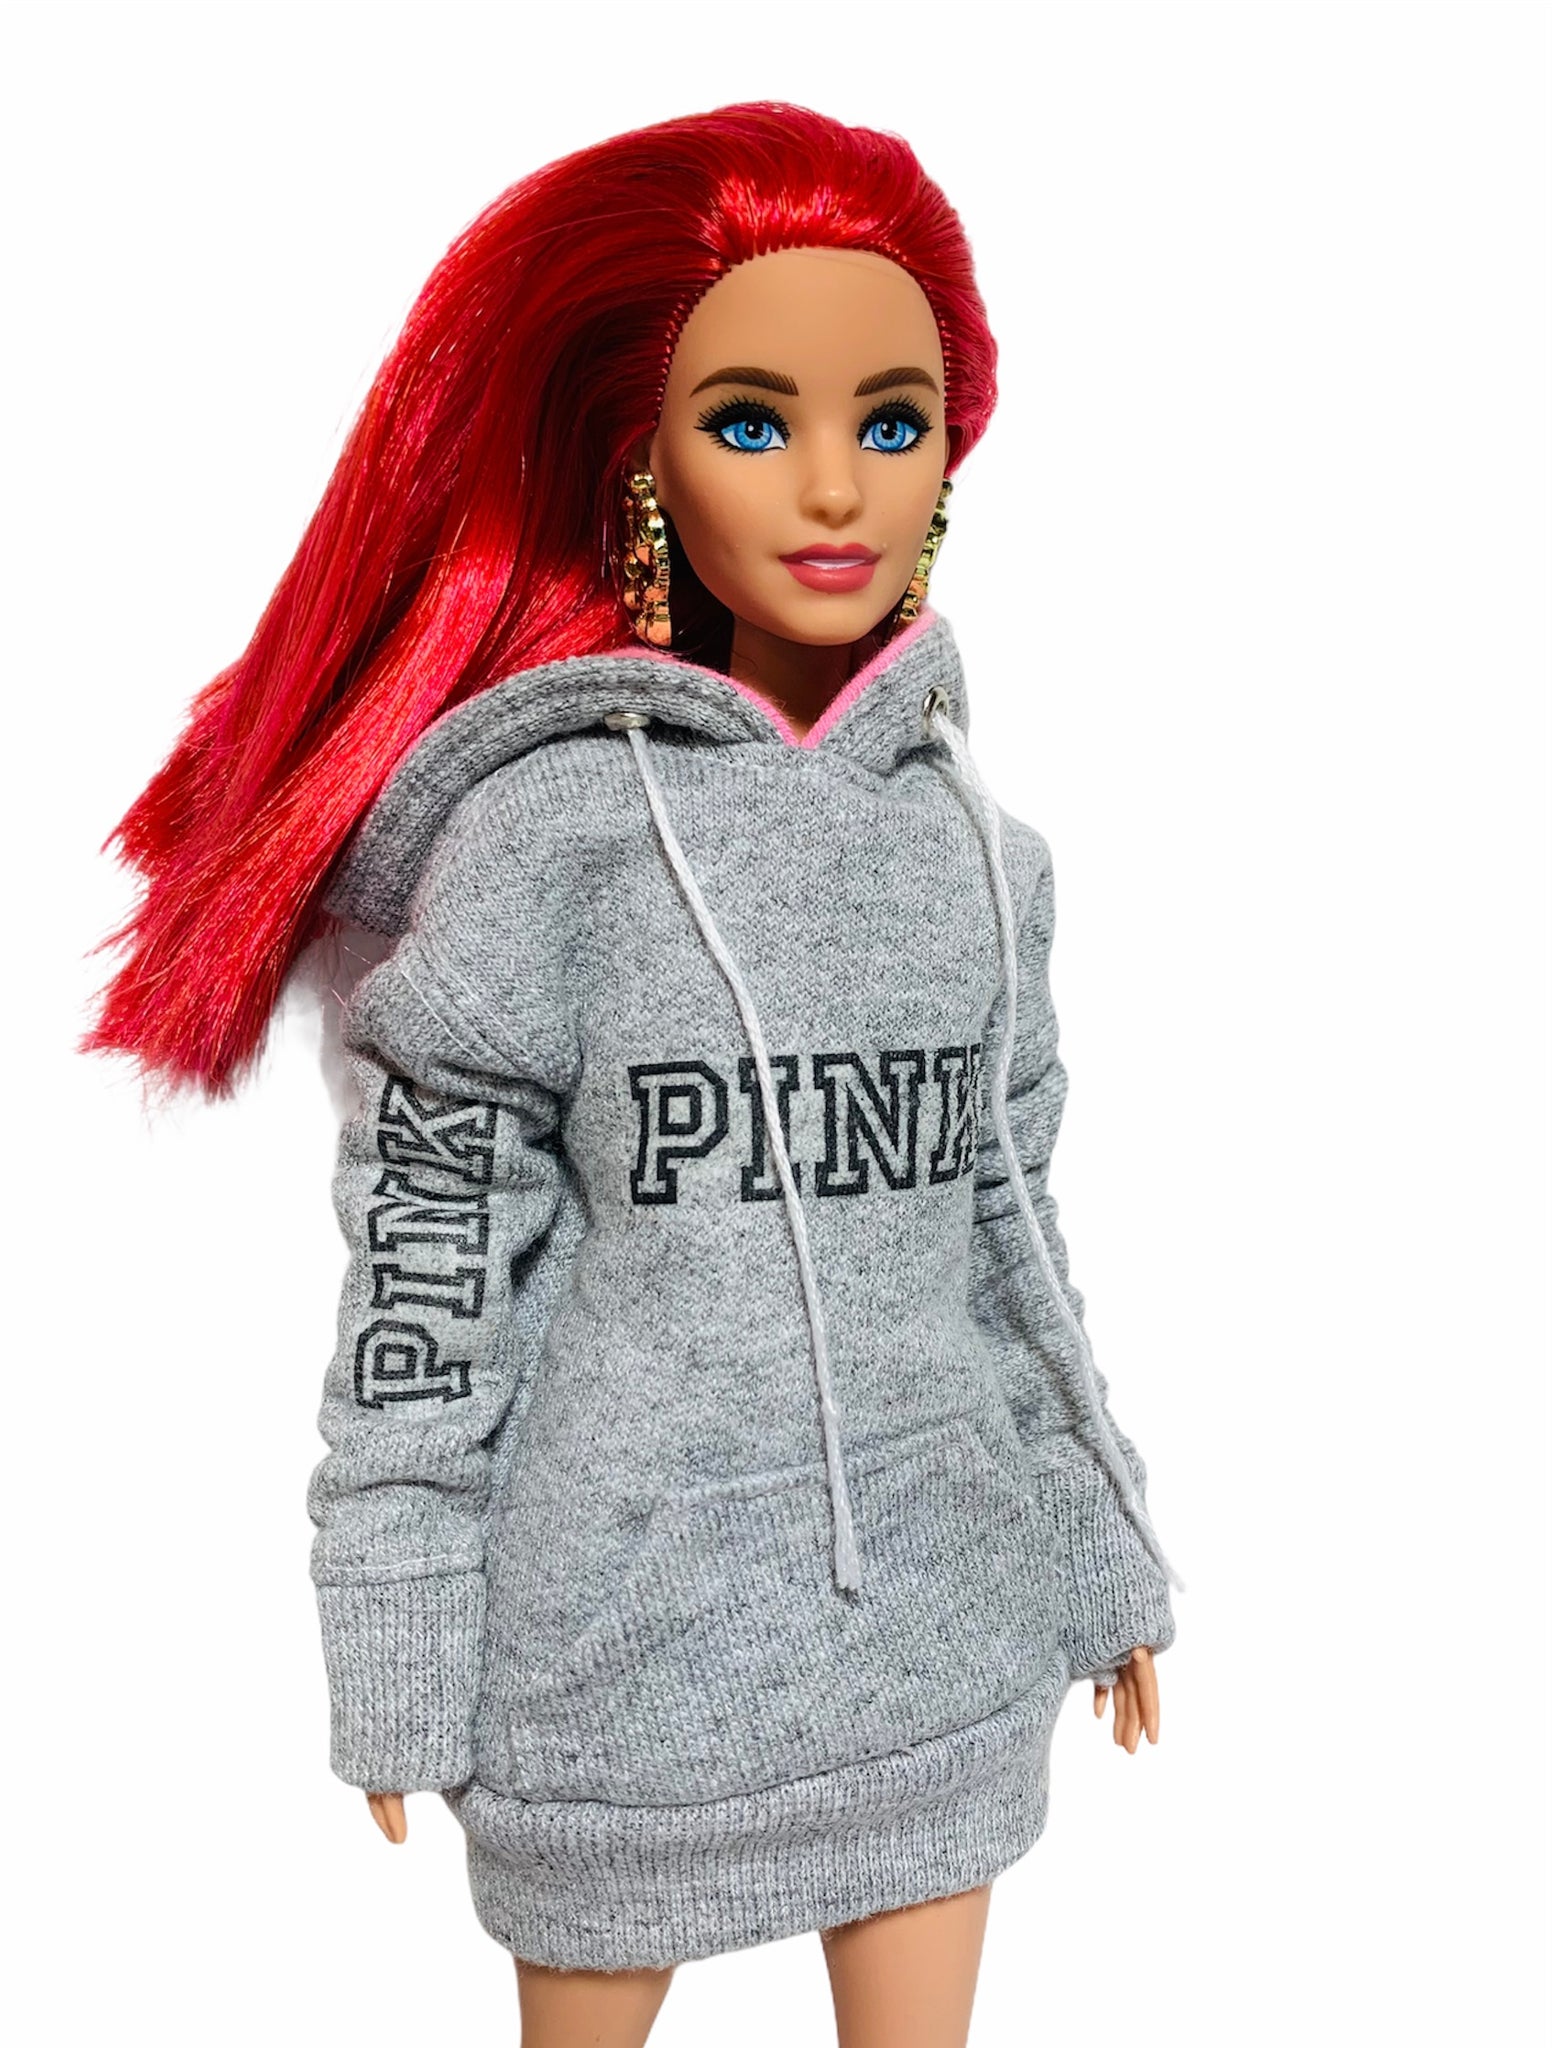 Oppositie Lagere school verder Pink oversized hoodie for Barbie doll – The Doll Tailor